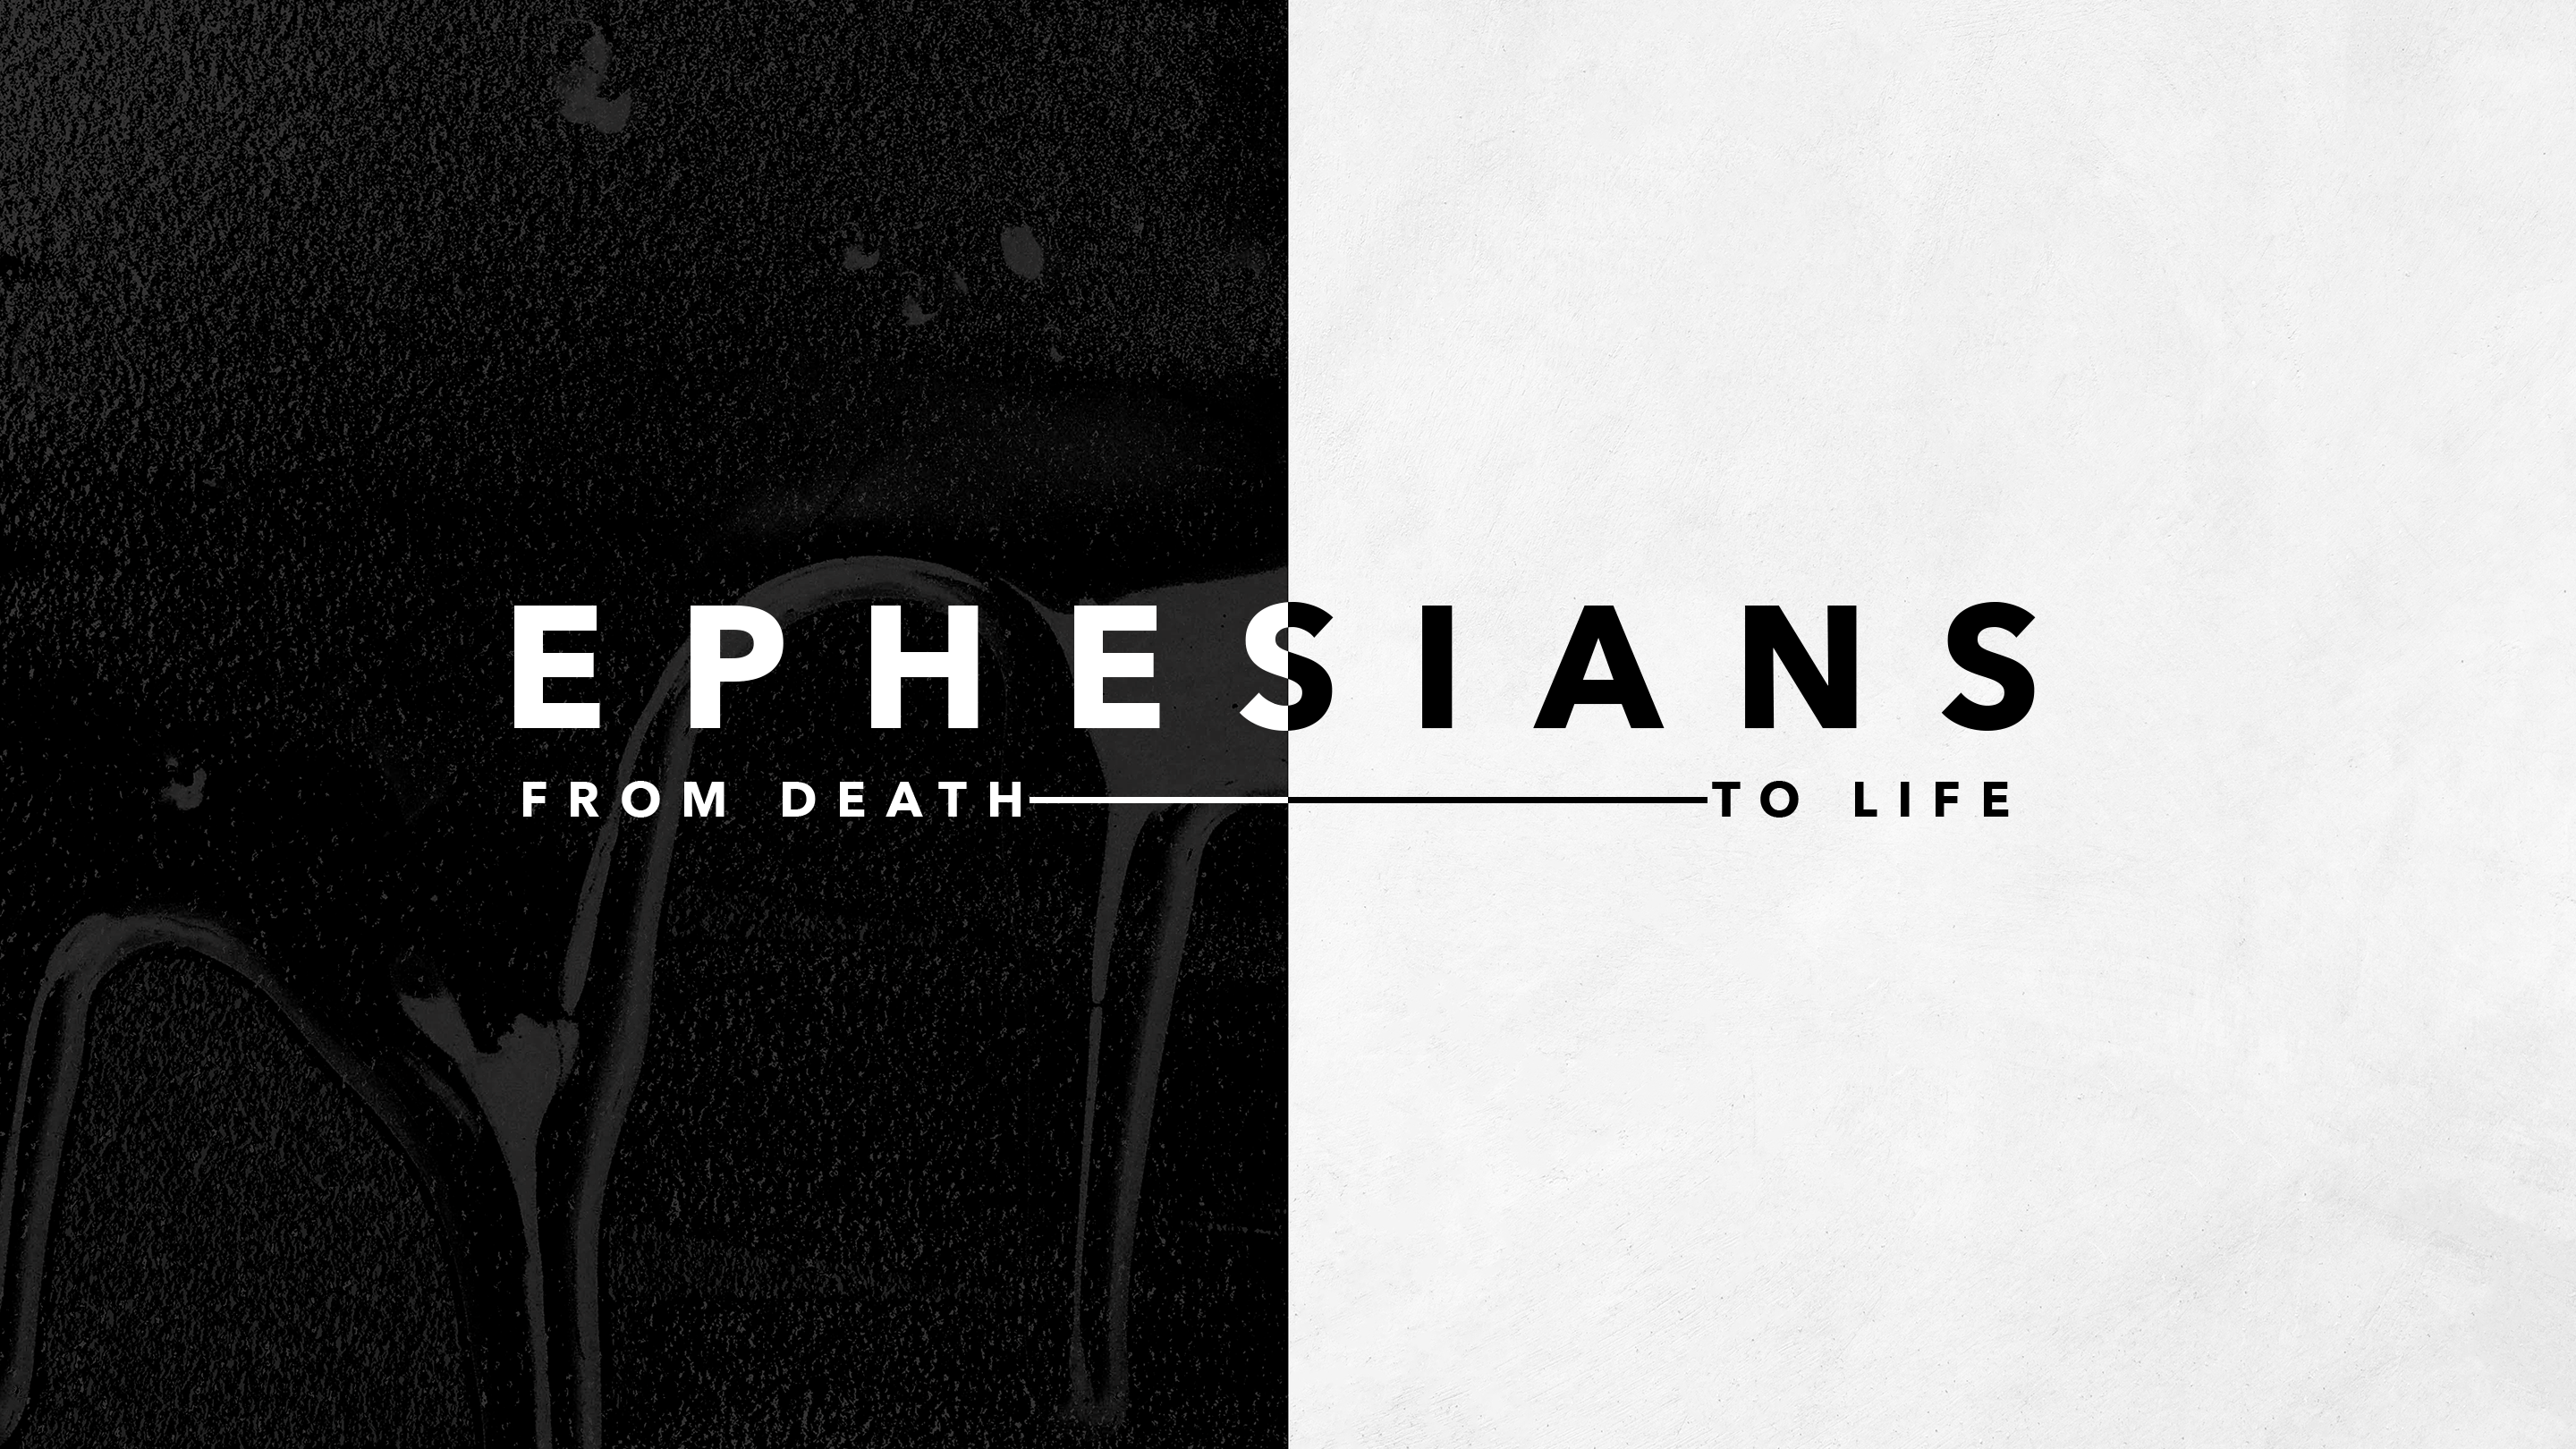 From Death to Life: Built for Eternity (Ephesians 2:11-13)